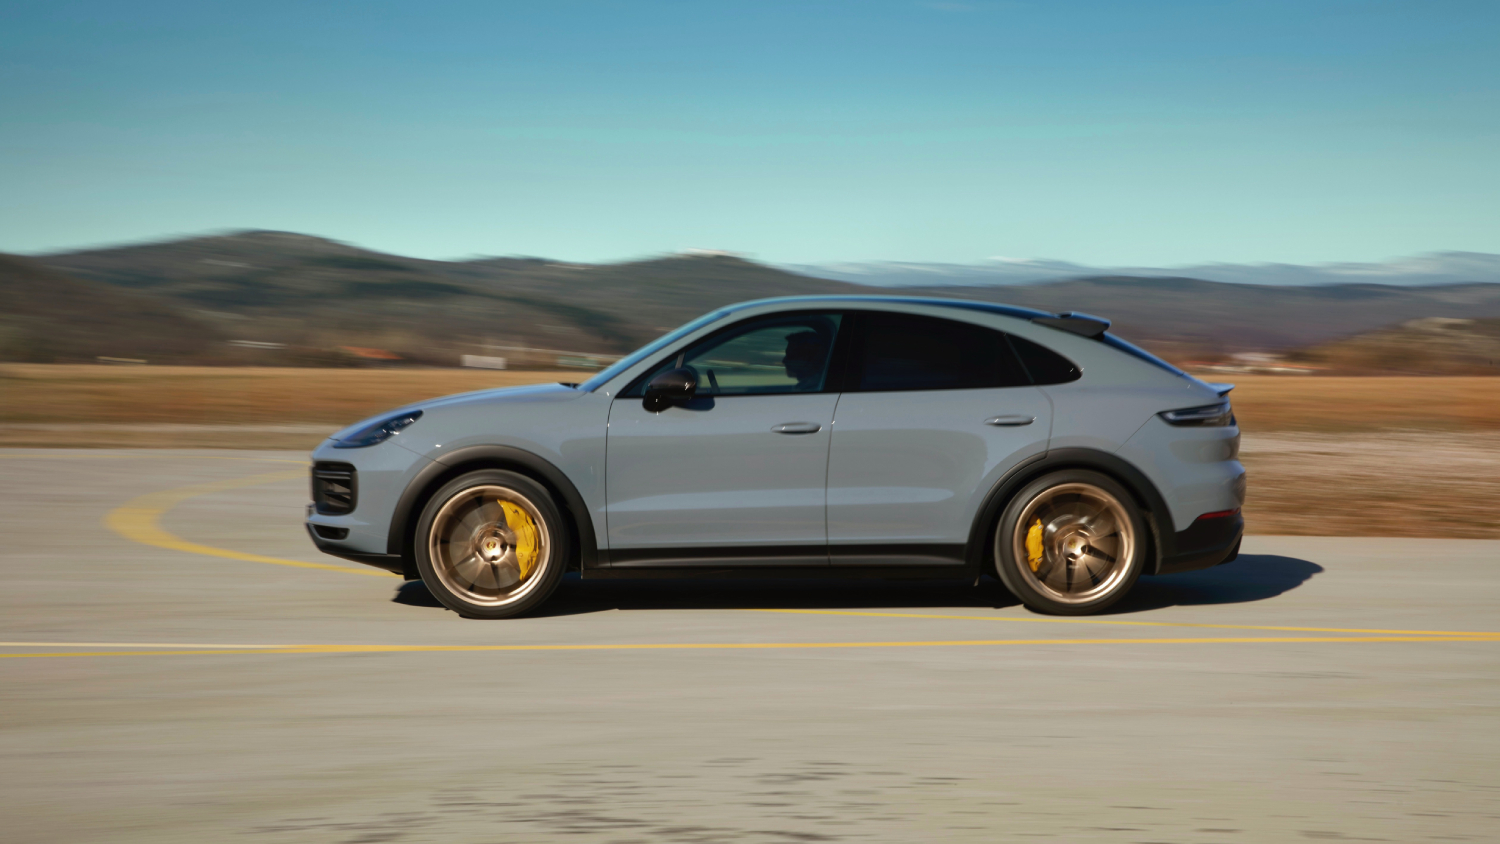 The most satisfying SUVs in the south include the Porsche Cayenne sport utility vehicle